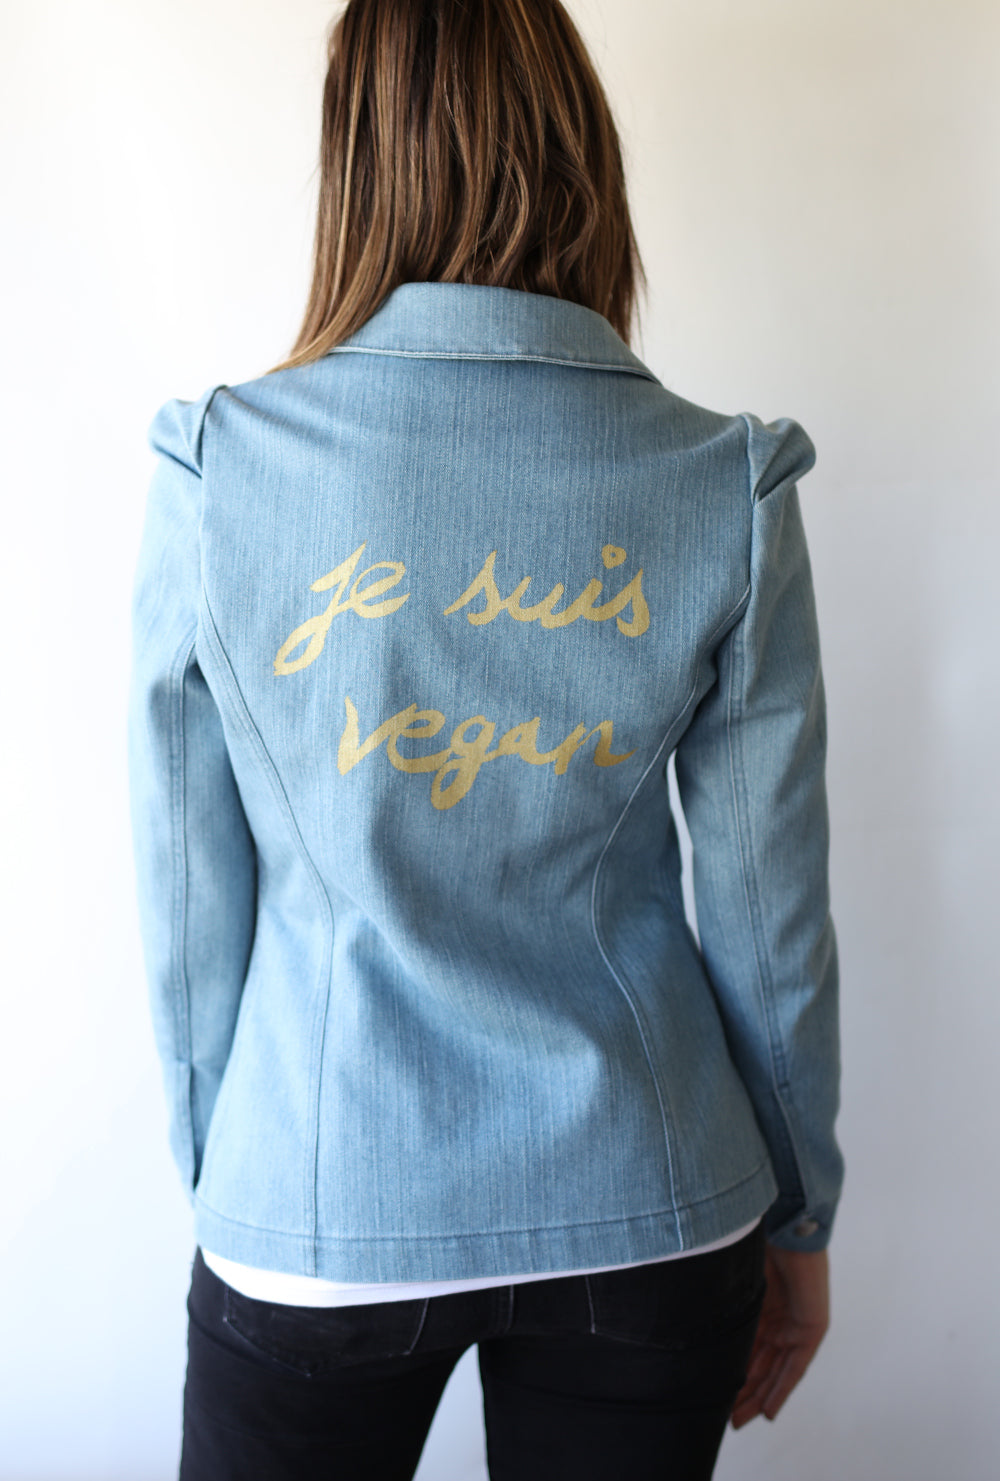 Haute Couture One of a Kind Up-cycled New Jacket "Je Suis Vegan" Collab & Design by Jarod-Pi